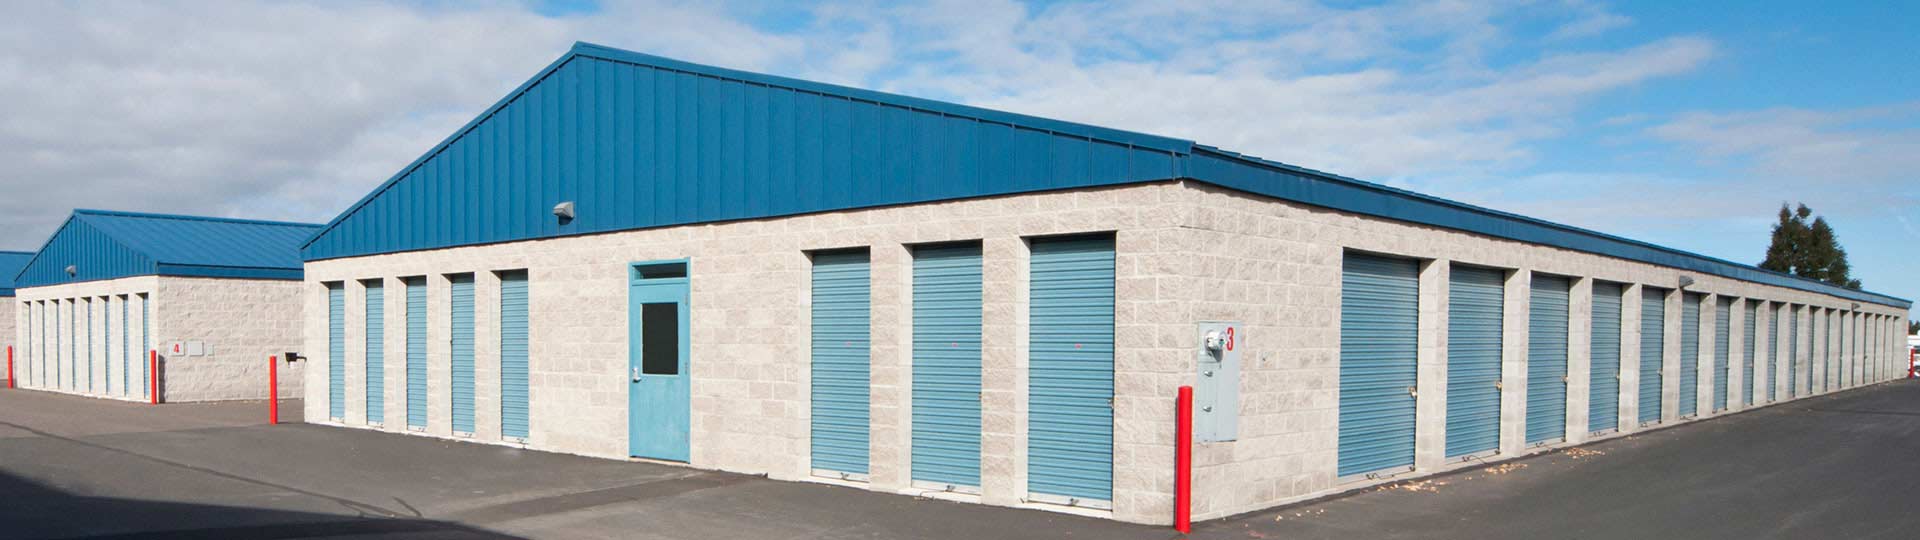 Commercial Real Estate Financing Self Storage